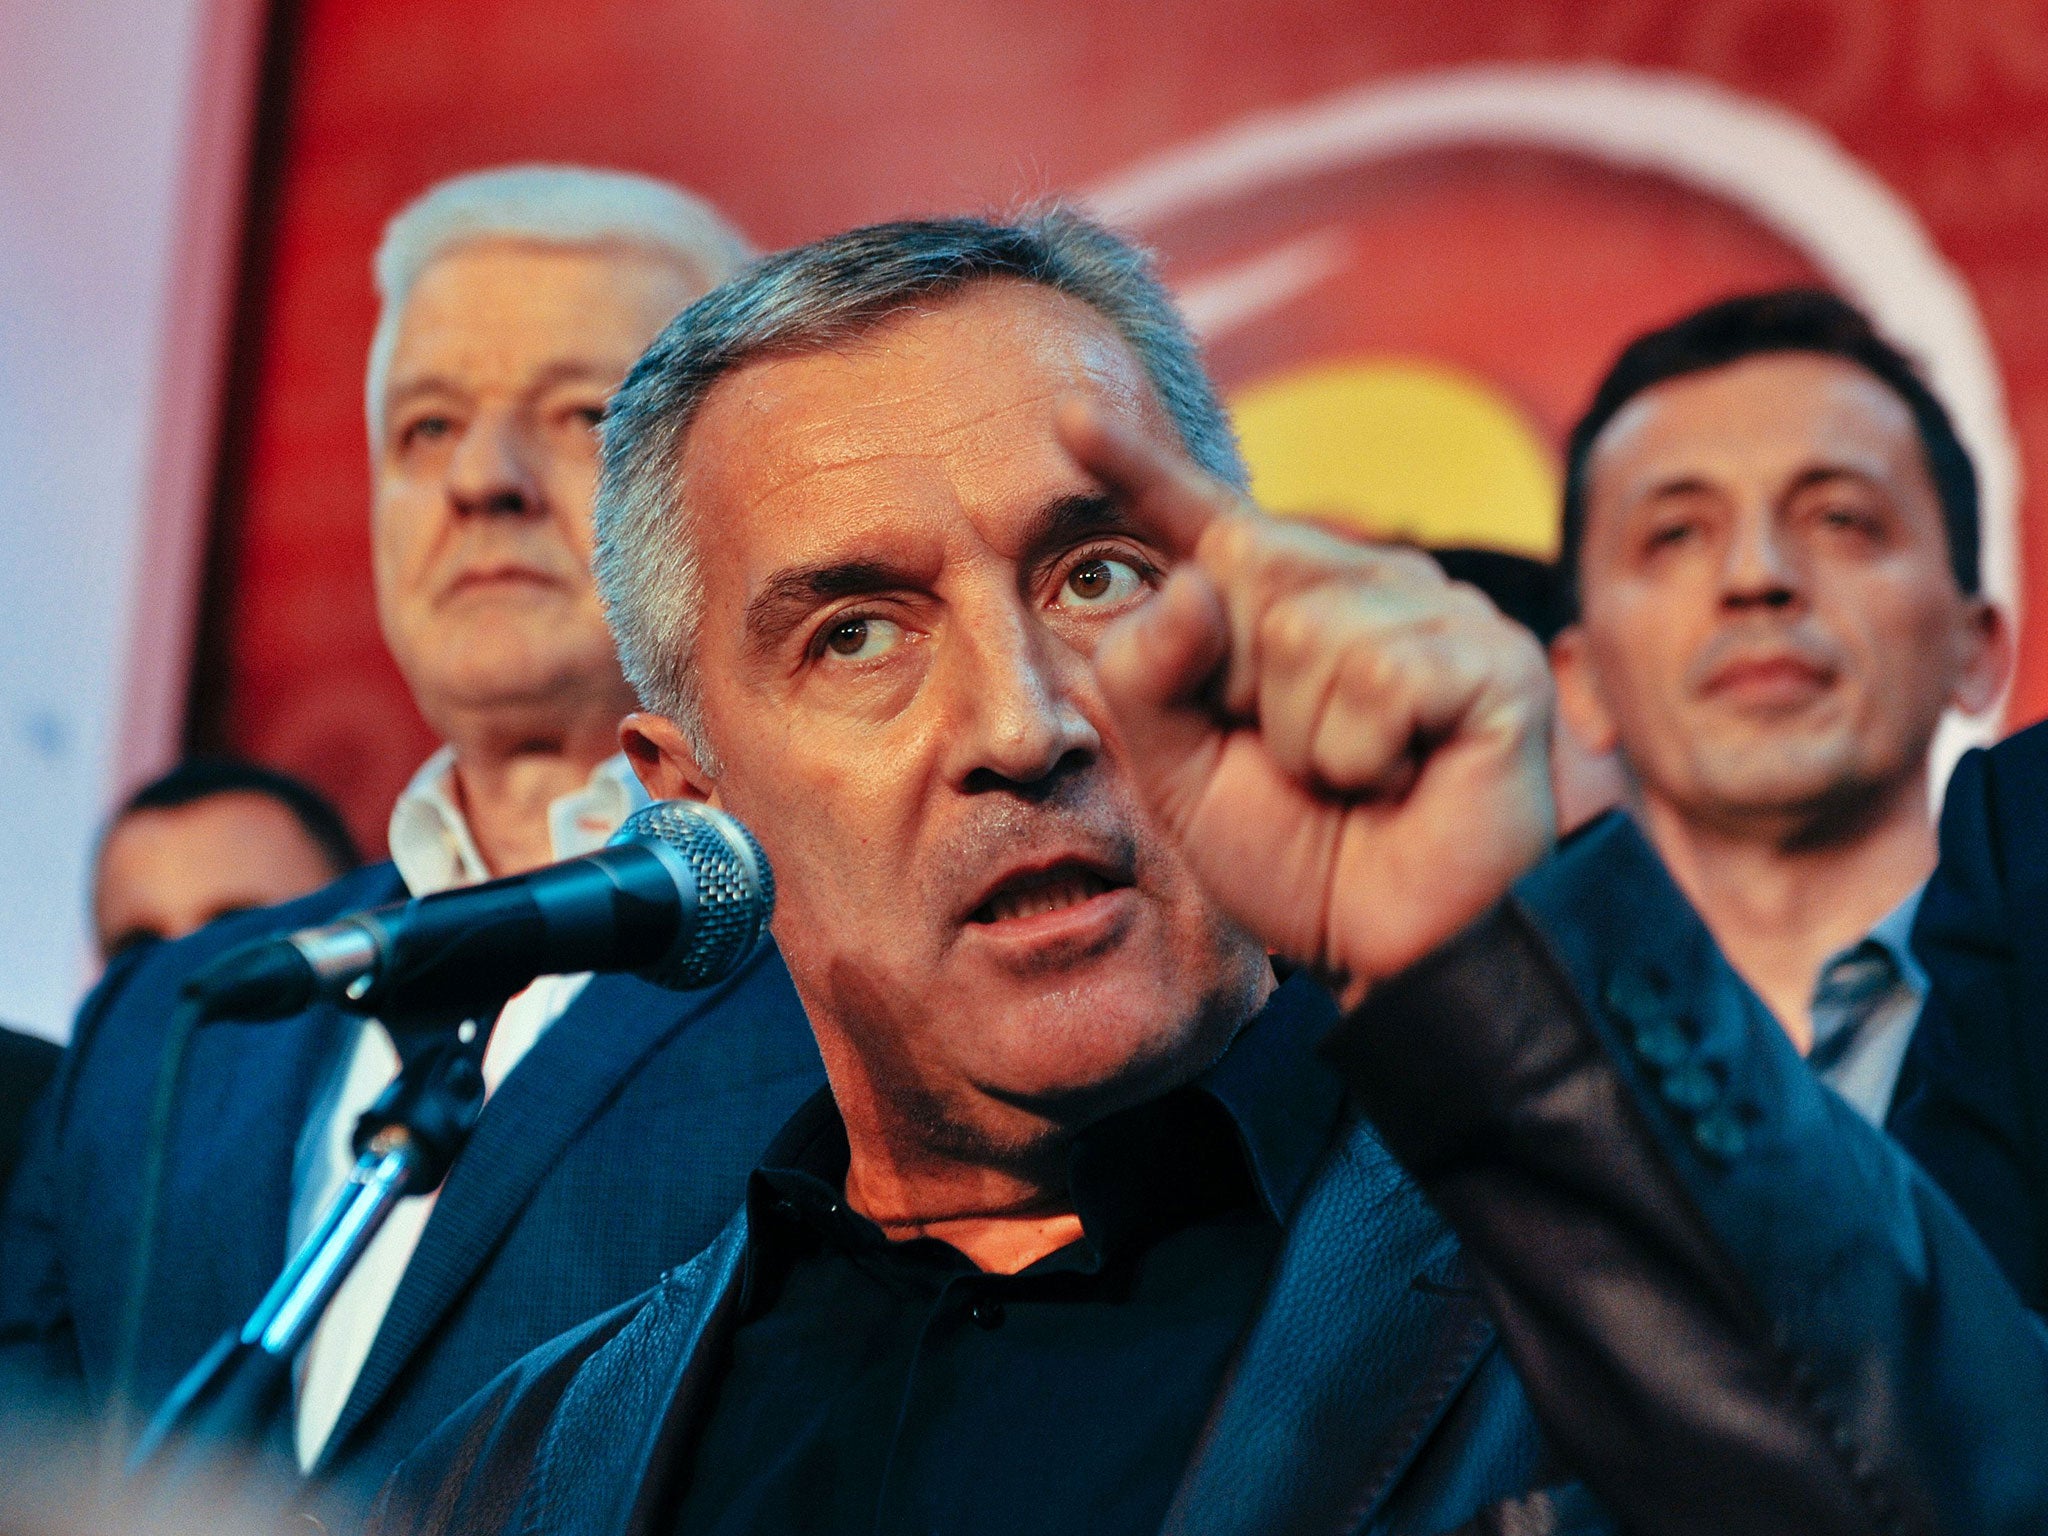 Two Russian intelligence officers reportedly spent months plotting to kill Prime Minister Milo Djukanovic